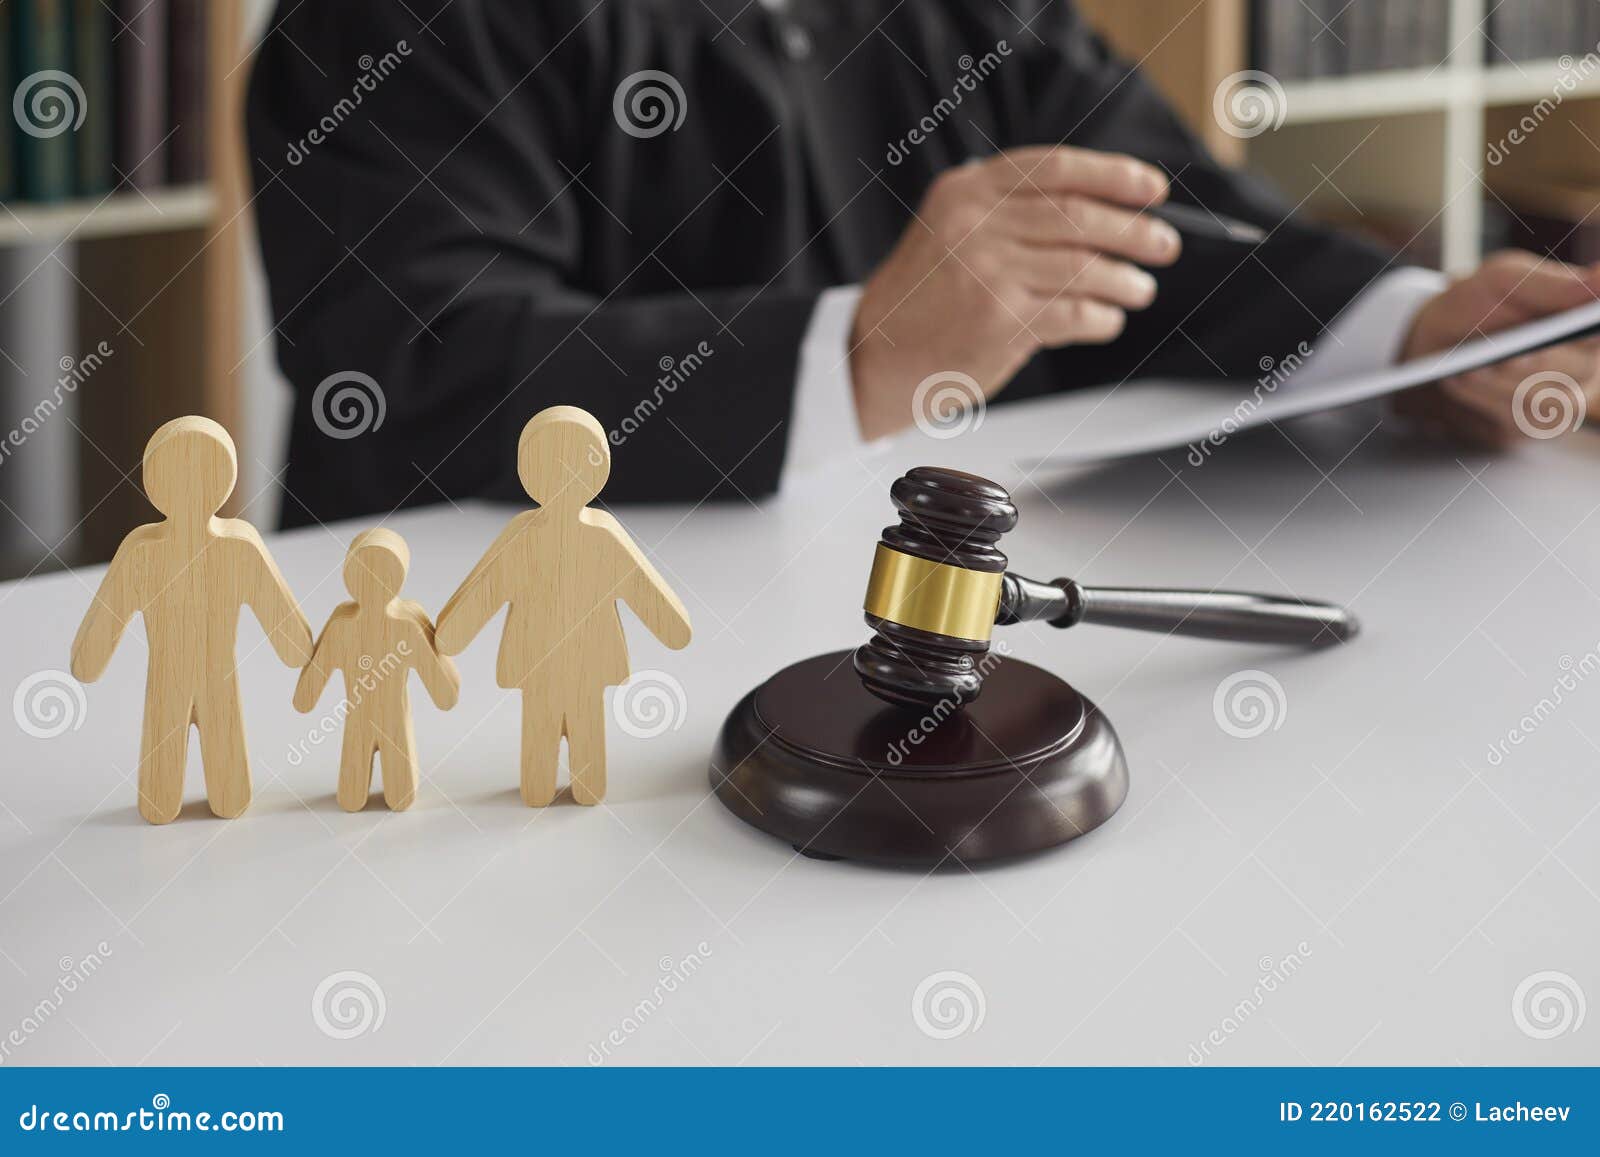 wooden figurines of family with child and gavel on background of judge conducting divorce process.